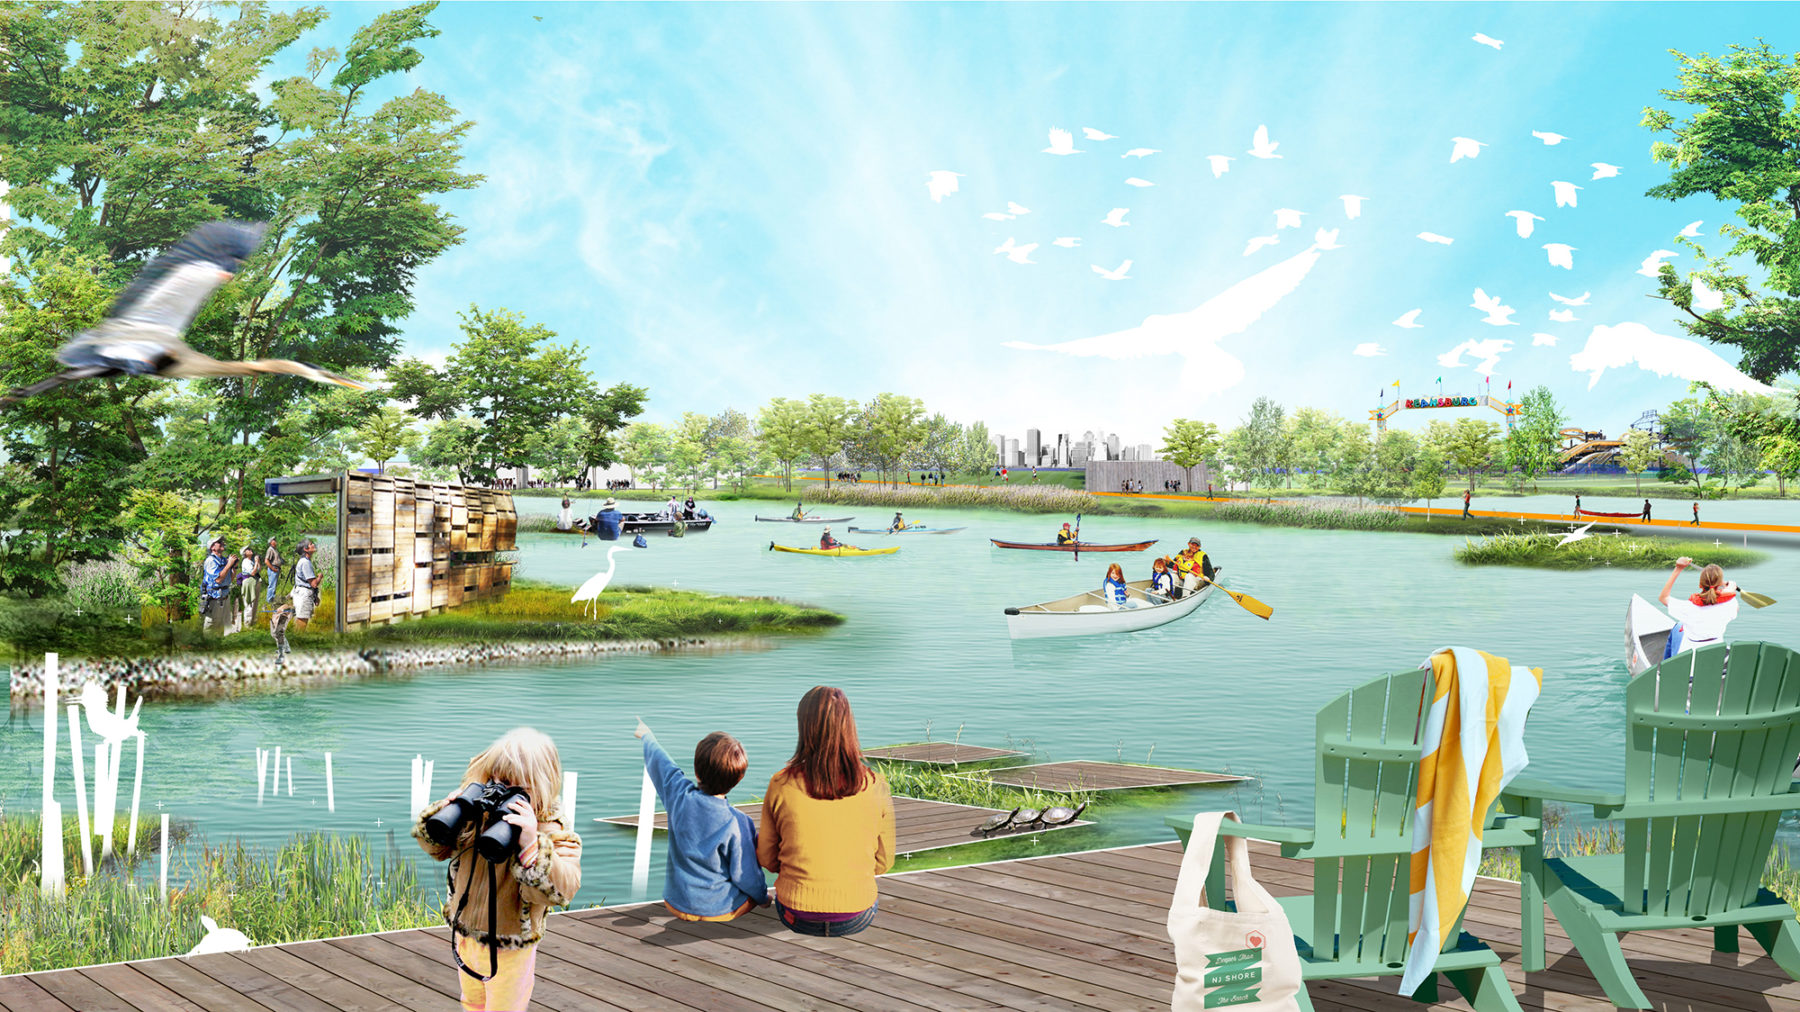 Perspective of Inland Bay vision with people sitting on a dock looking at wildlife and kayakers